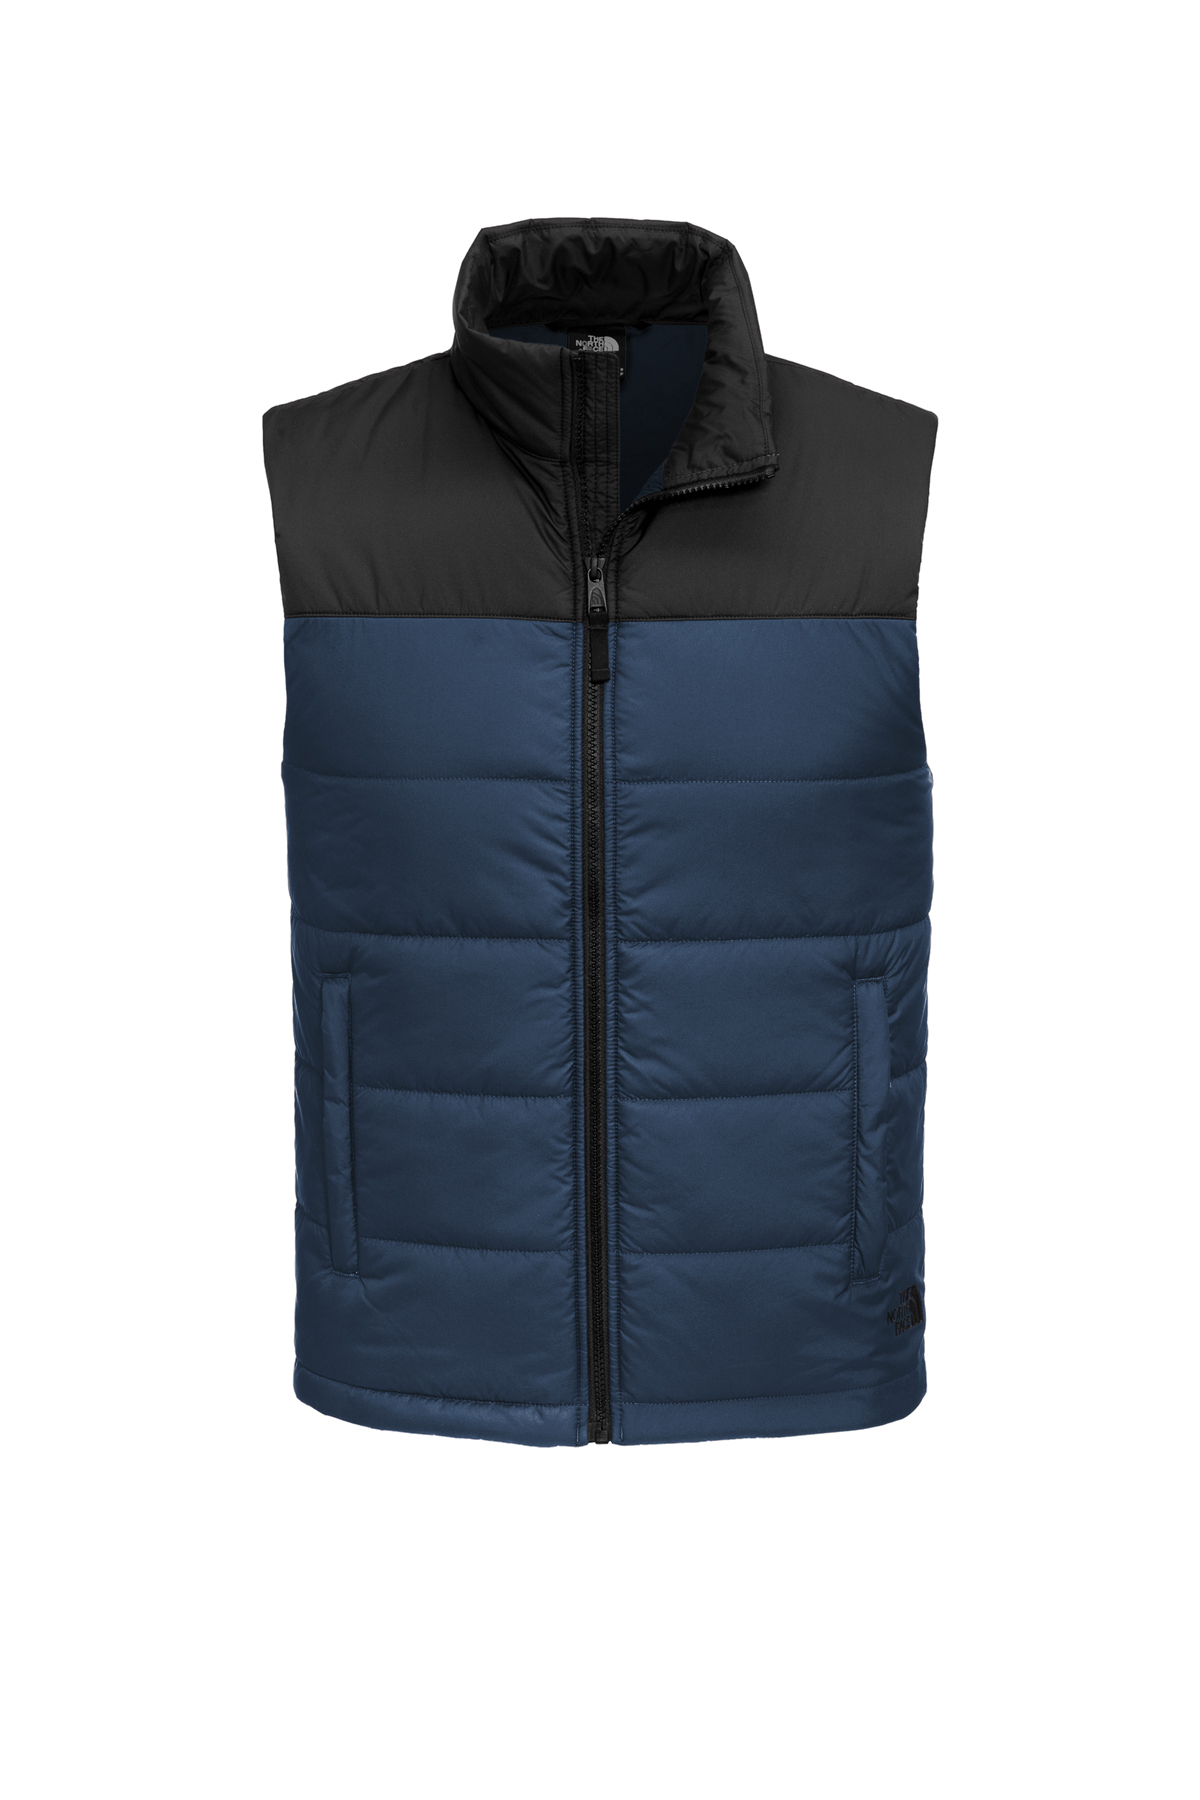 The North Face Everyday Insulated Vest | Product | Company Casuals